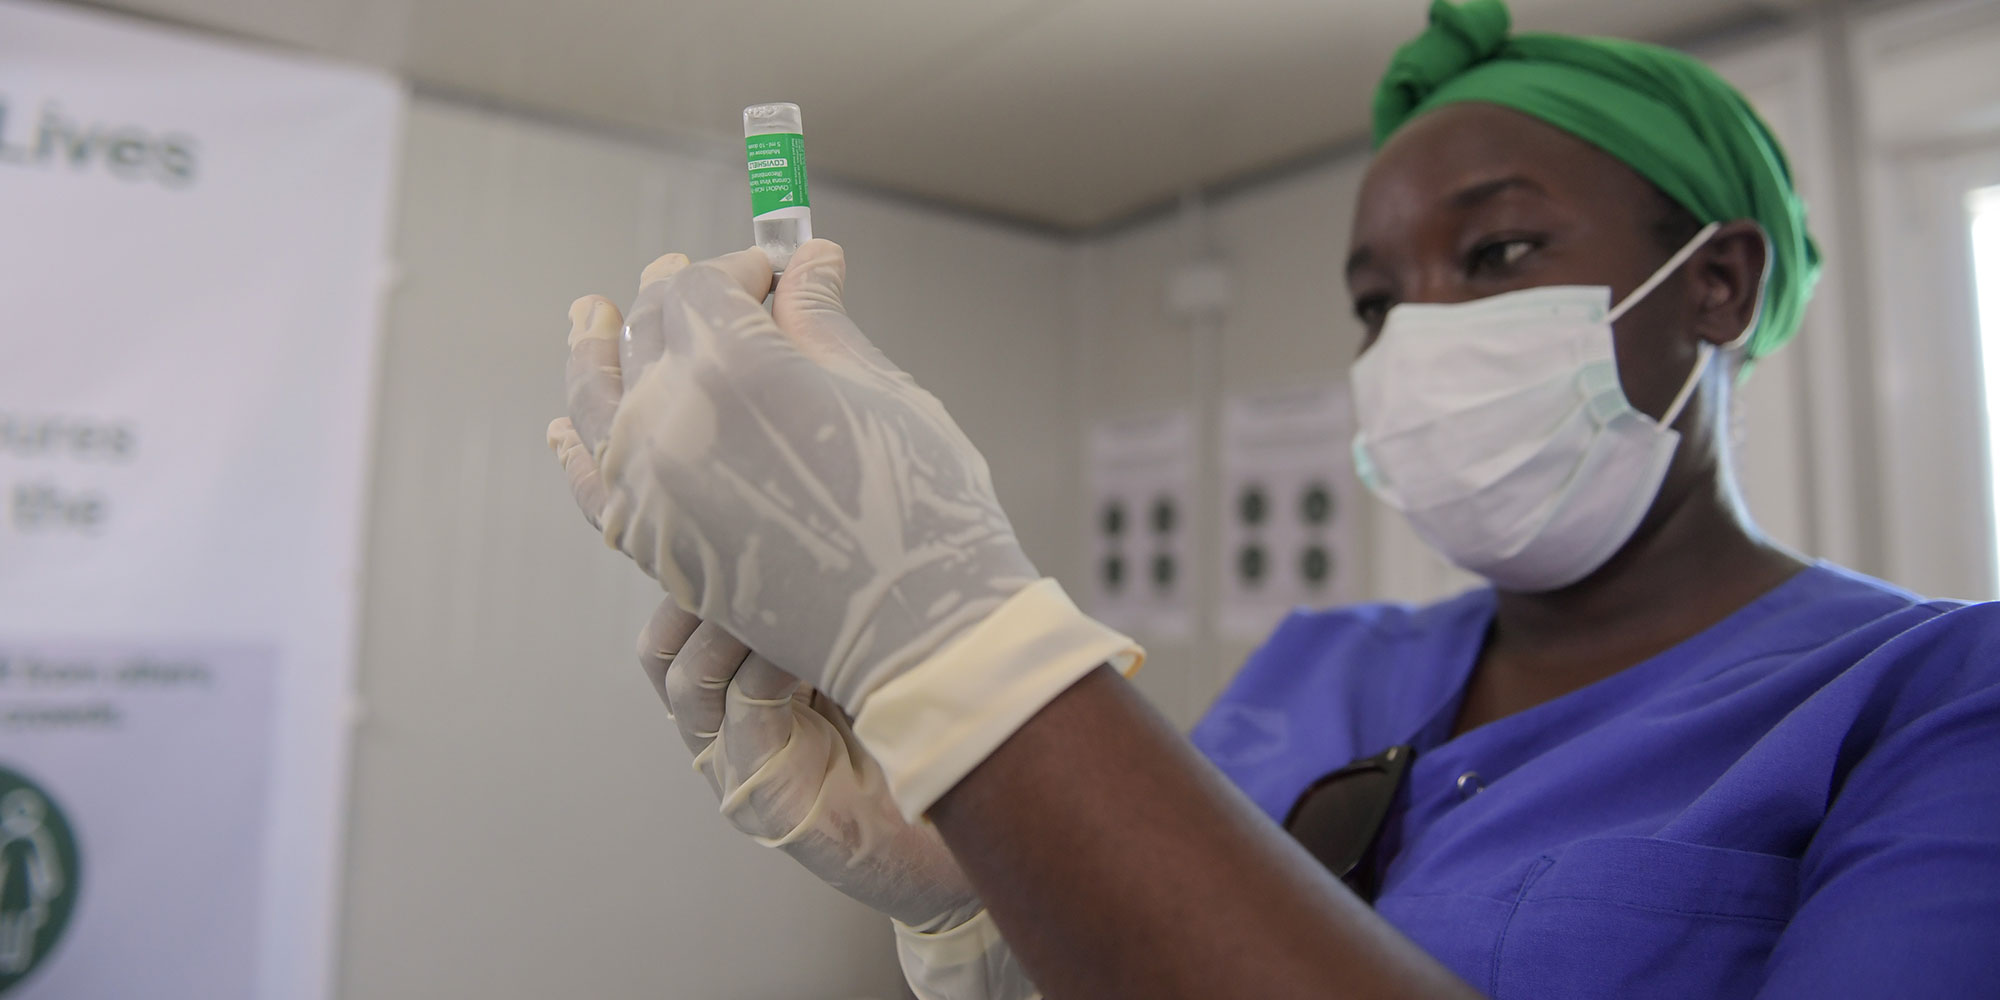  A medical officer prepares to administer the COVID-19 vaccine. Copyright: AMISOM Photo/Mokhtar Mohamed, Public Domain